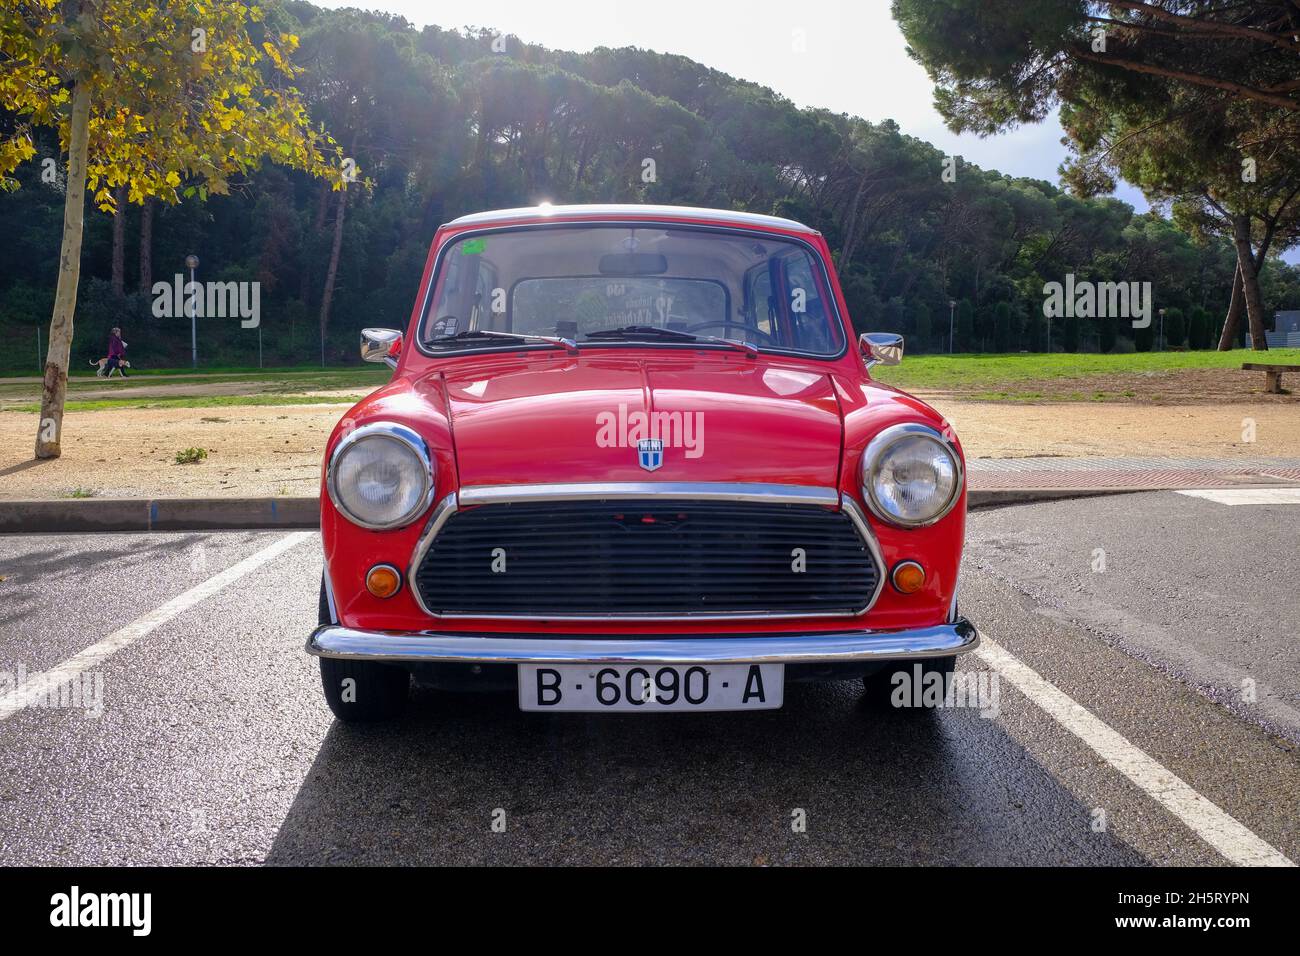 Lloret de Mar, Catalonia, Spain - 11.11.2021: bright red Mini 850 model old retro car in perfect condition parked on the city street Stock Photo